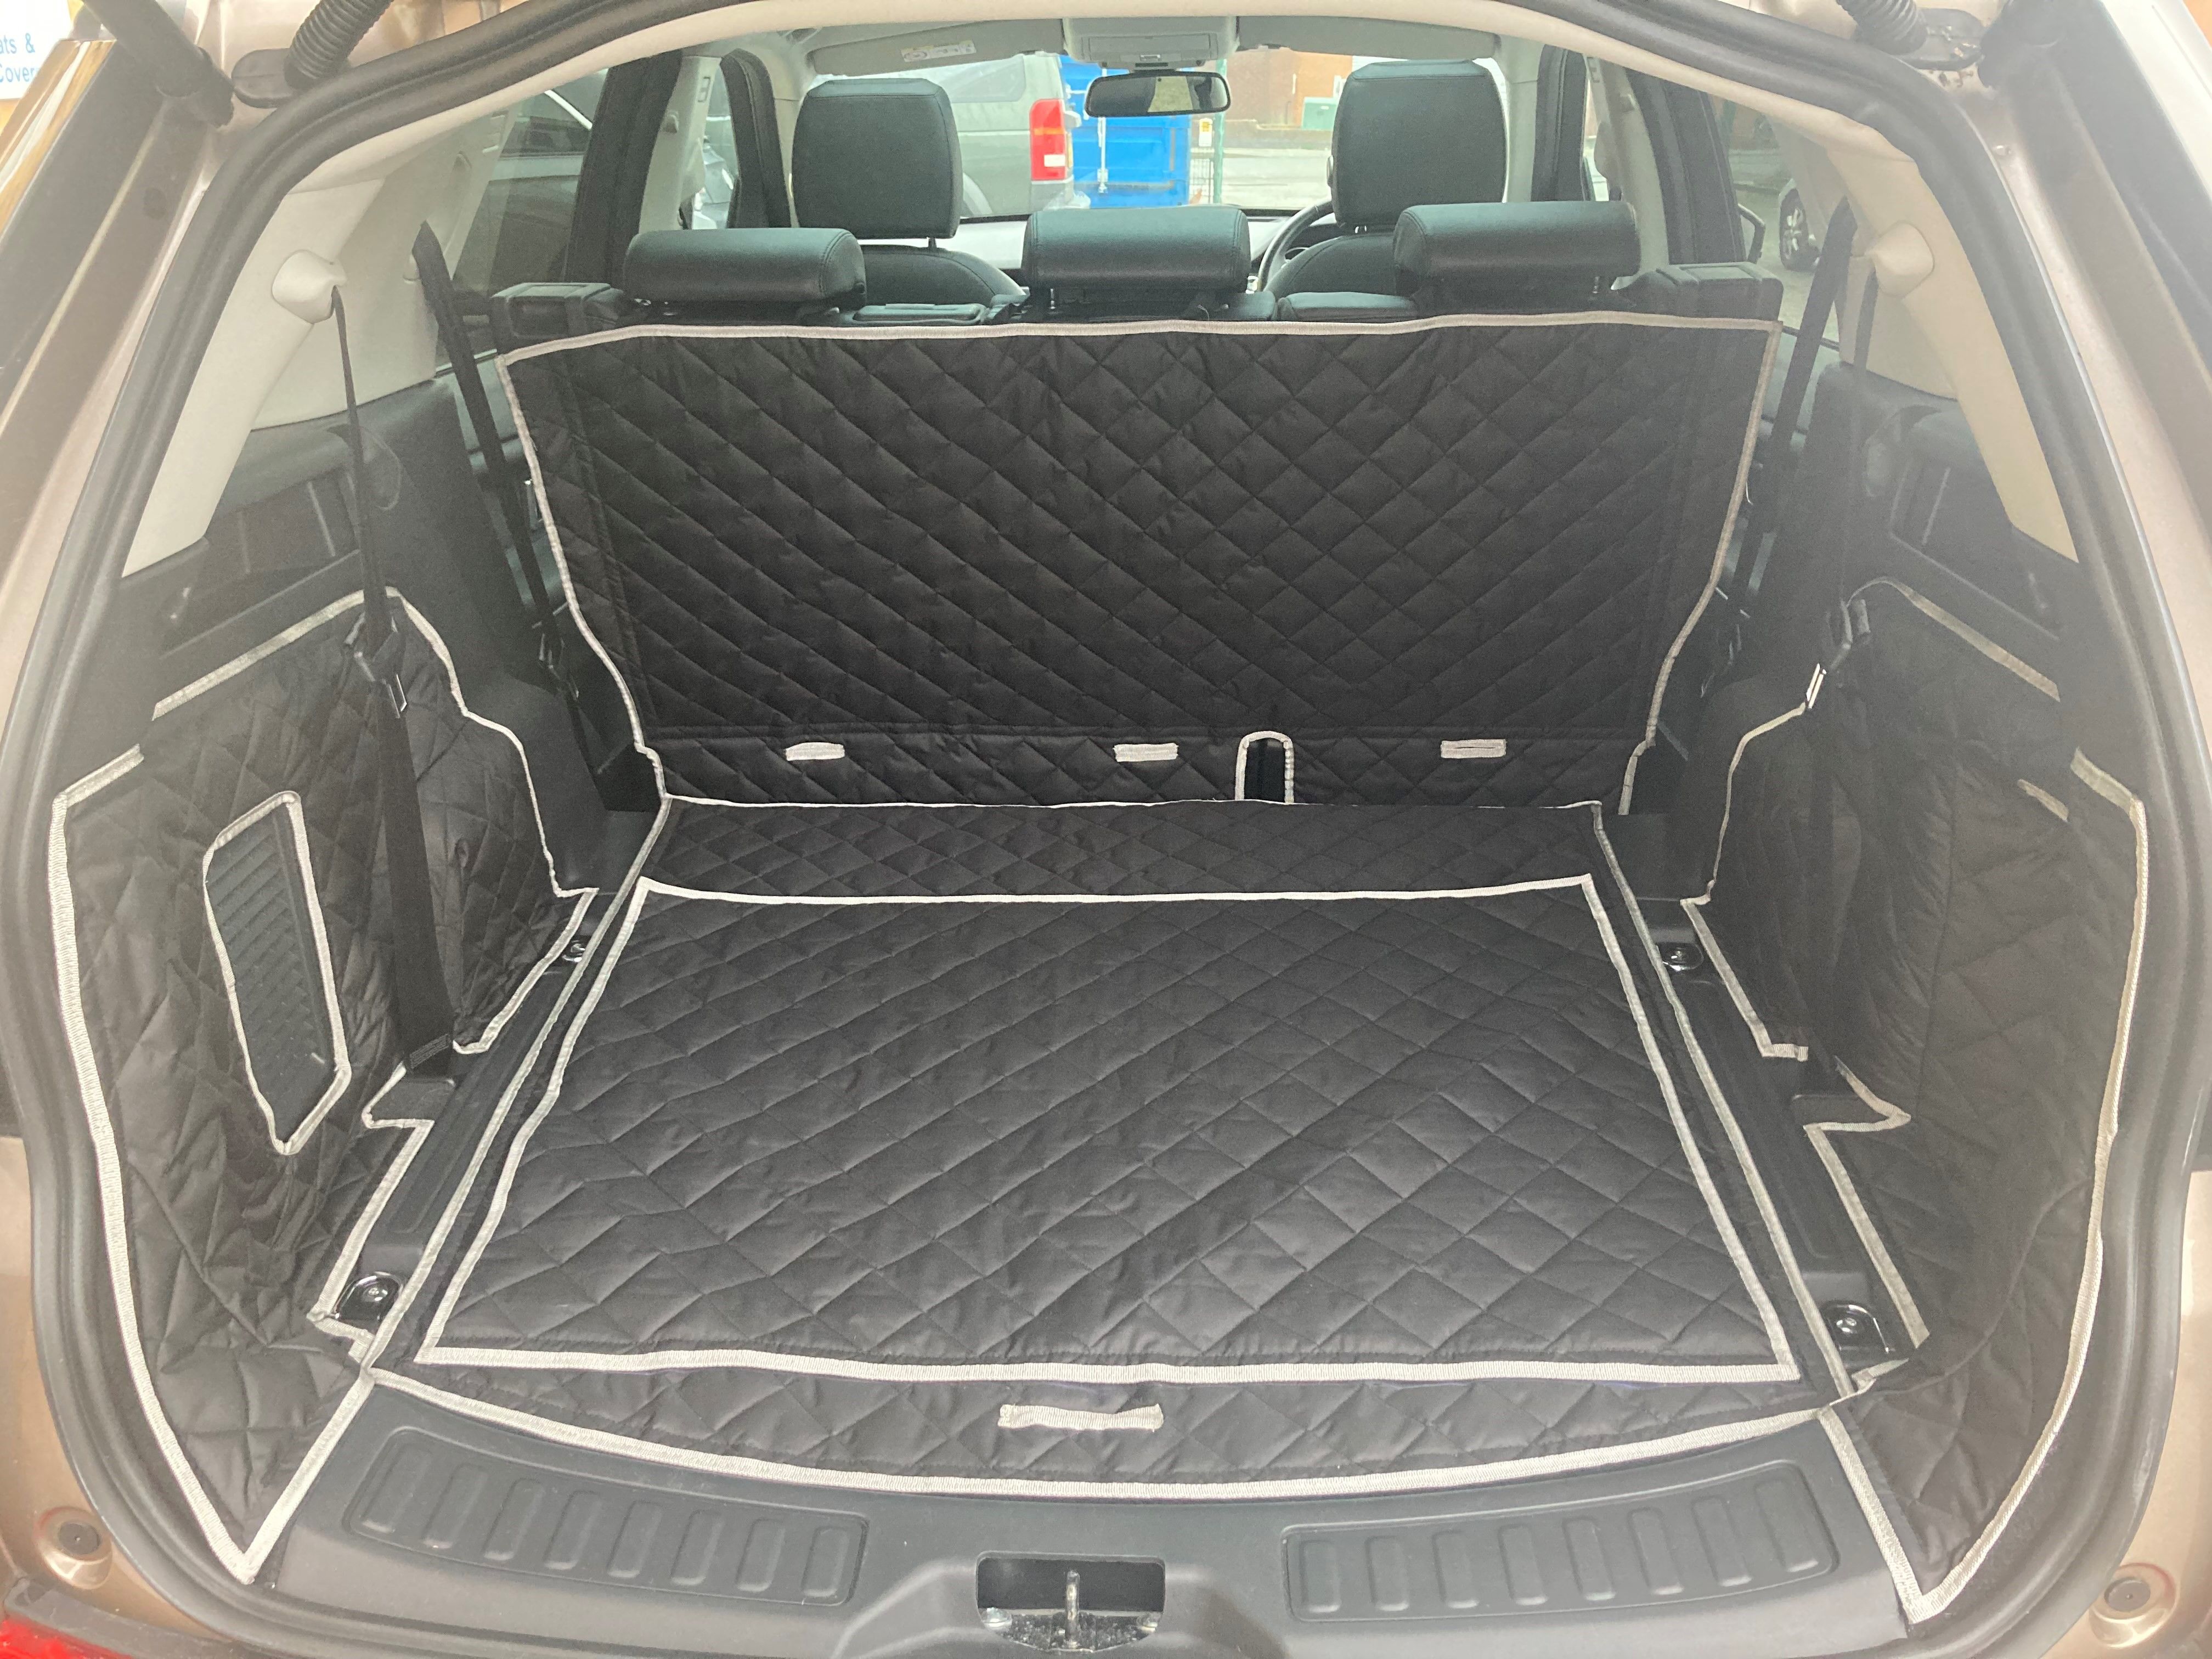 Land Rover Discovery Sport (2015 - Present) Boot Liner